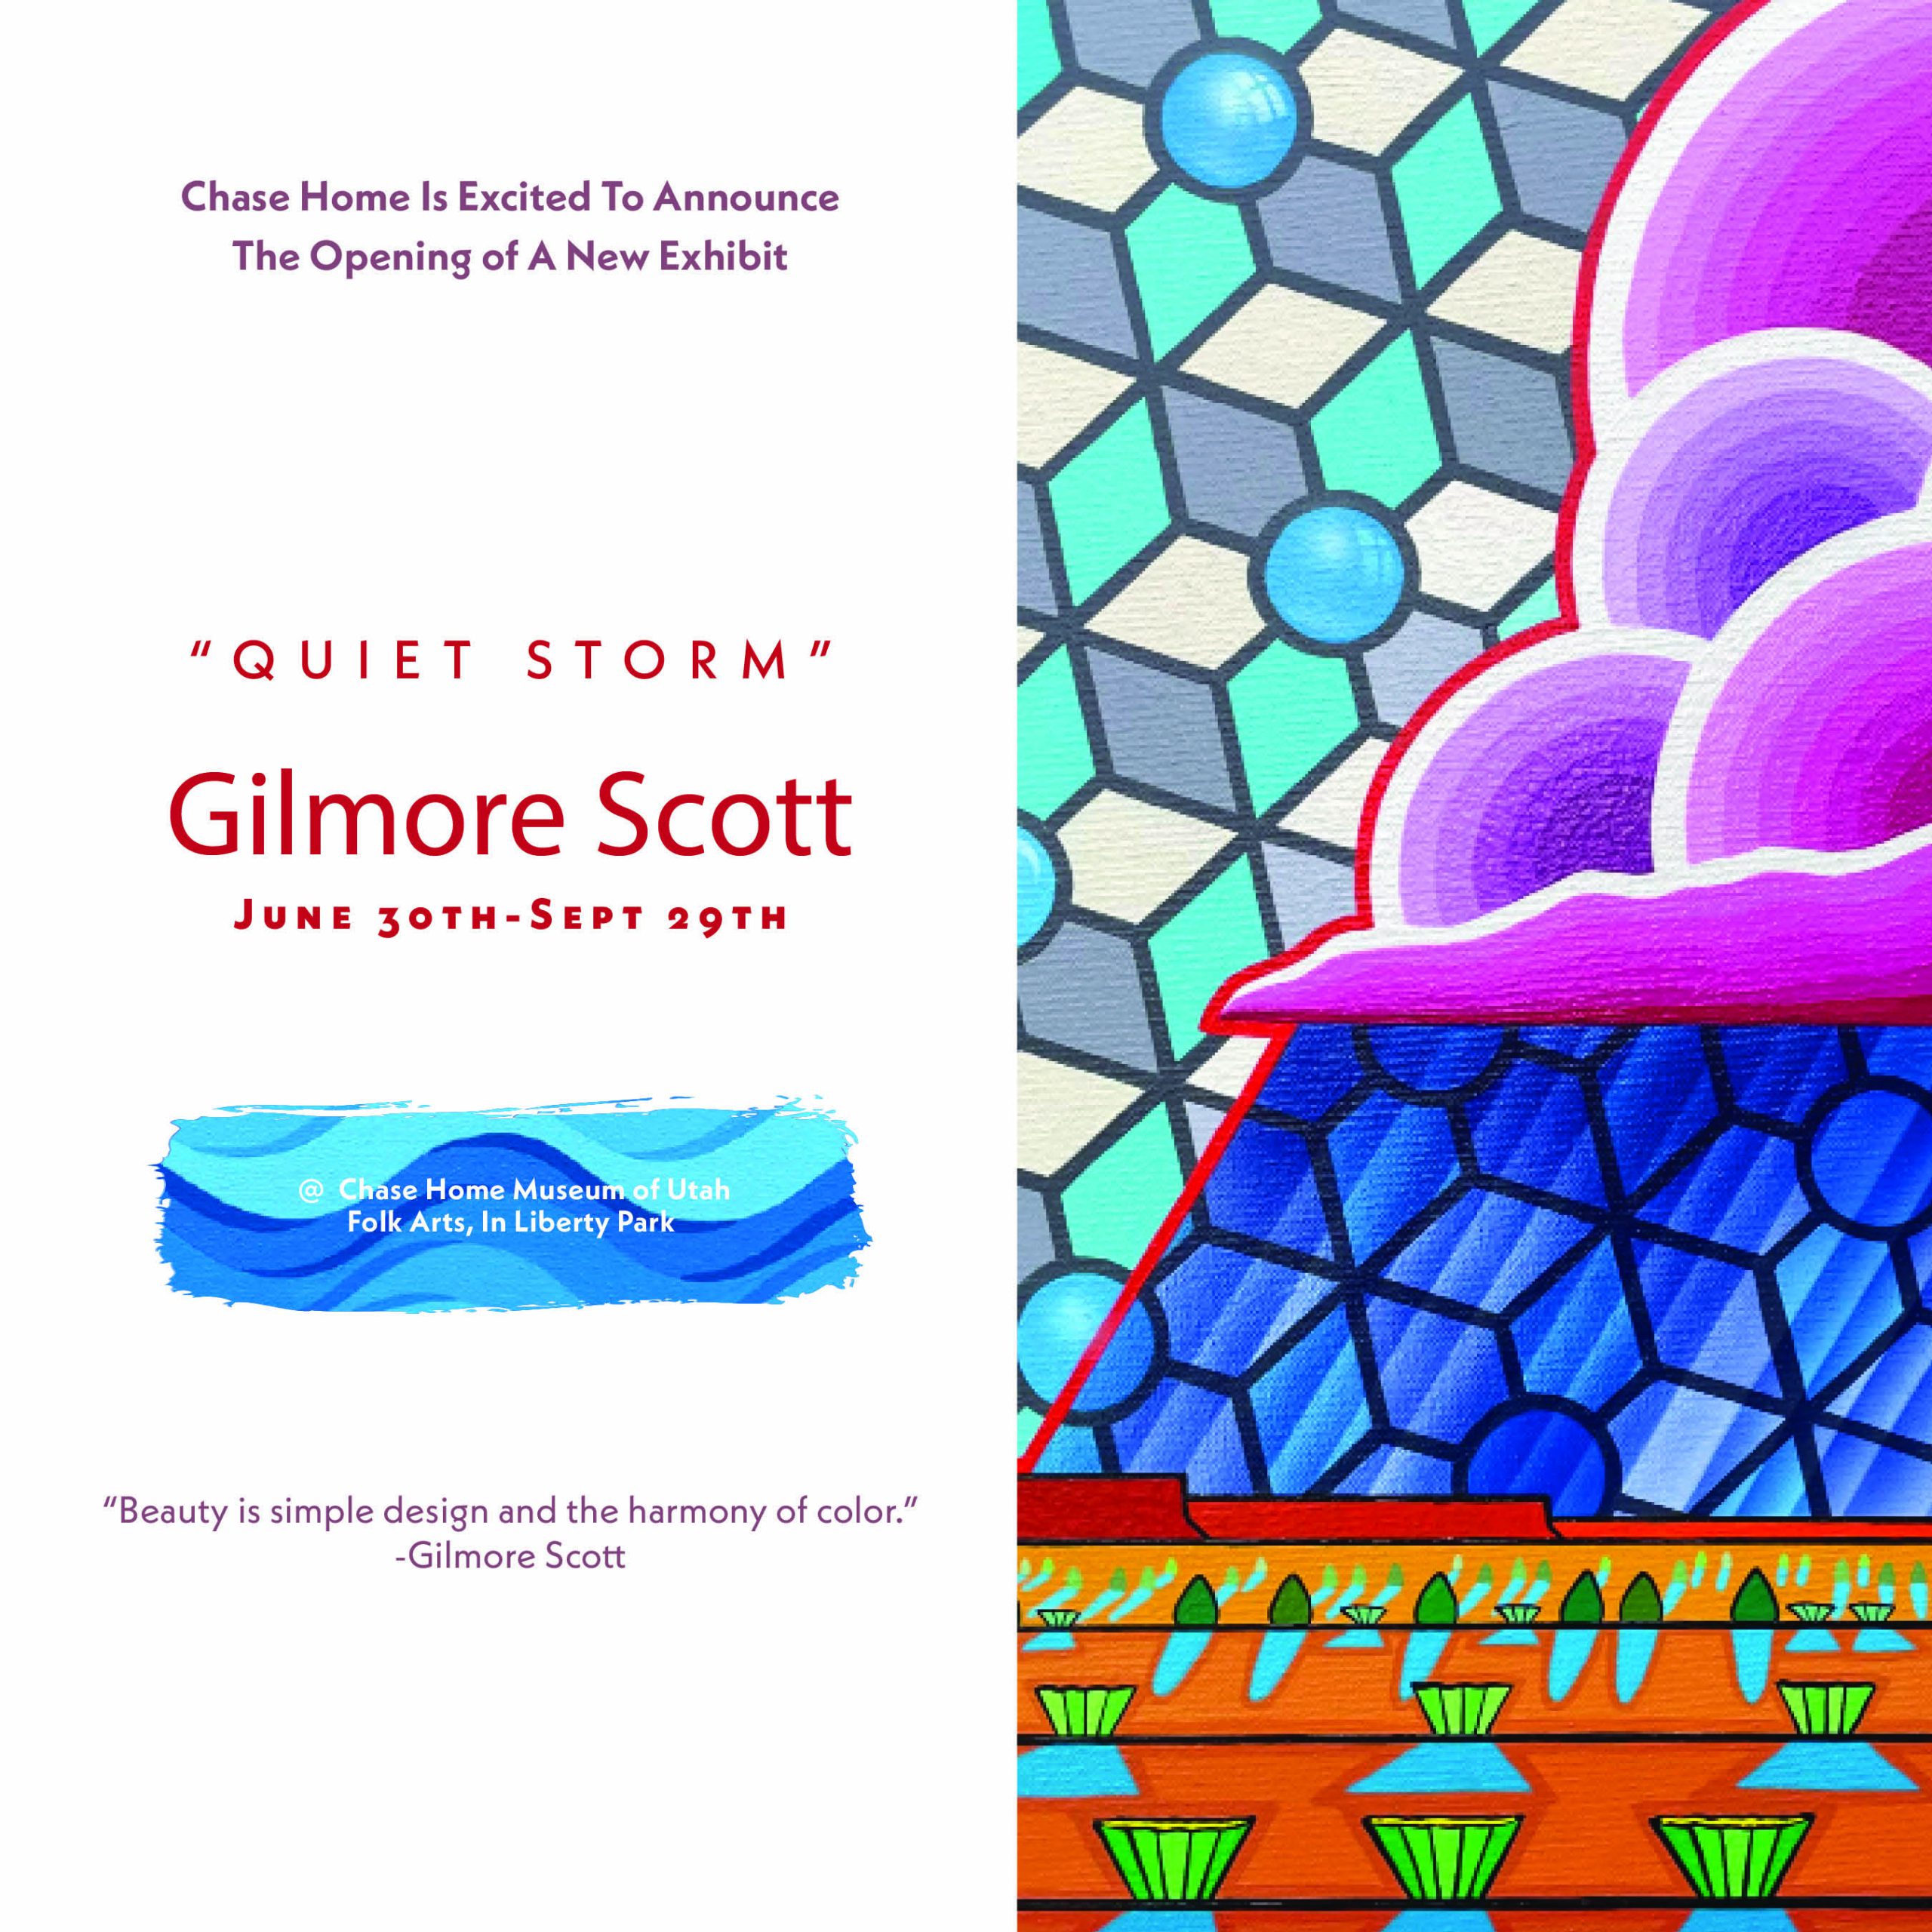 "Quiet Storm." Gilmore Scott. June 30th to September 29th. Chase Home Museum of Utah Folk Arts in Liberty Park.